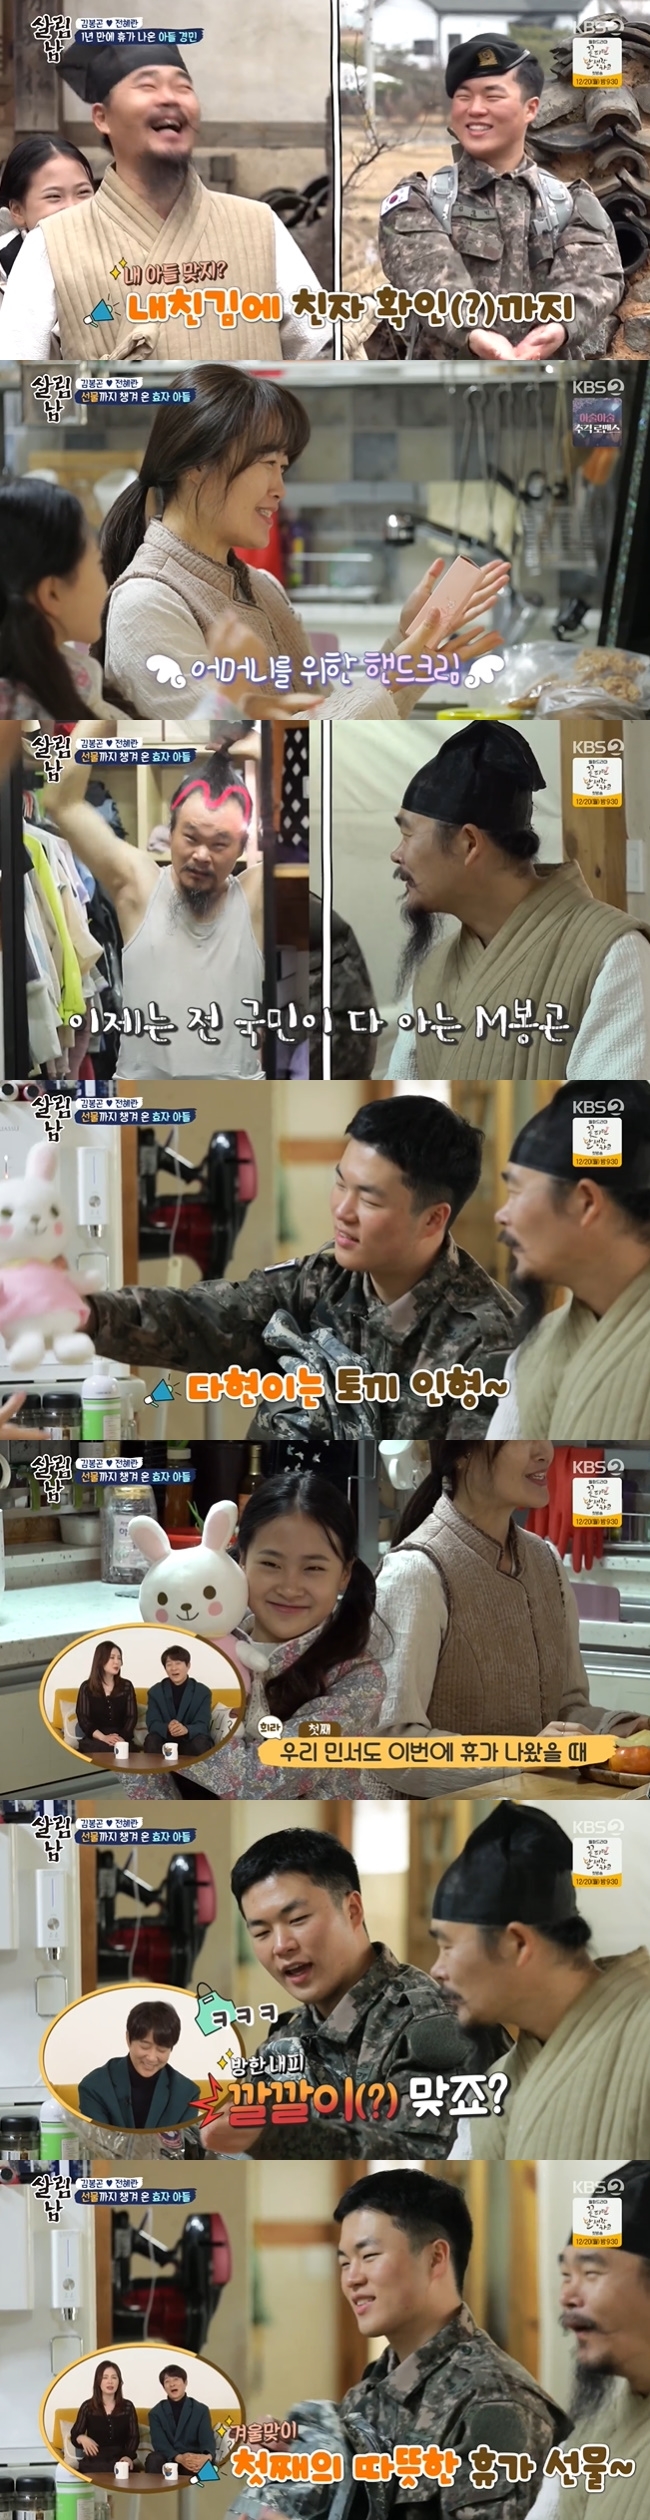 Choi Soo-jong Ha Hee-ra recalled his son Minseo, who is currently serving in the military, as he saw his second son Kim Bong-gon decoration, who took a family gift and took a vacation.On KBS 2TVs Season 2 of Living Men, which aired on December 18, Kim Bong-gons second son returned home on vacation.Kim Bong-gon decoration and youngest daughter Kim Dahyun swept the yard together and cleaned the house.When Kim Bong-gon decoration bruised the broomstick of the youngest Dahyun, his wife said, Dont just say it, sweep it hard.I think it would be nice to teach it by personal actions. At that time, Kim Kyung-min, the second son in military service, arrived at the house.Kim Dahyun ran to his arms shouting brother in the appearance of his brother who came out on vacation in a year, and all his family members were greeted with Kim Kyung-min with a bright expression.Kim Bong-gon decoration was pleased to ask his dignified saluting son, Who are you son?After a tumultuous welcome, Kim Kyung-min took out a gift for his family.Kim Kyung-min handed Mother a hand cream, hair loss shampoo to his father Kim Bong-gon decoration, and a rabbit doll to his youngest Kim Dahyun.